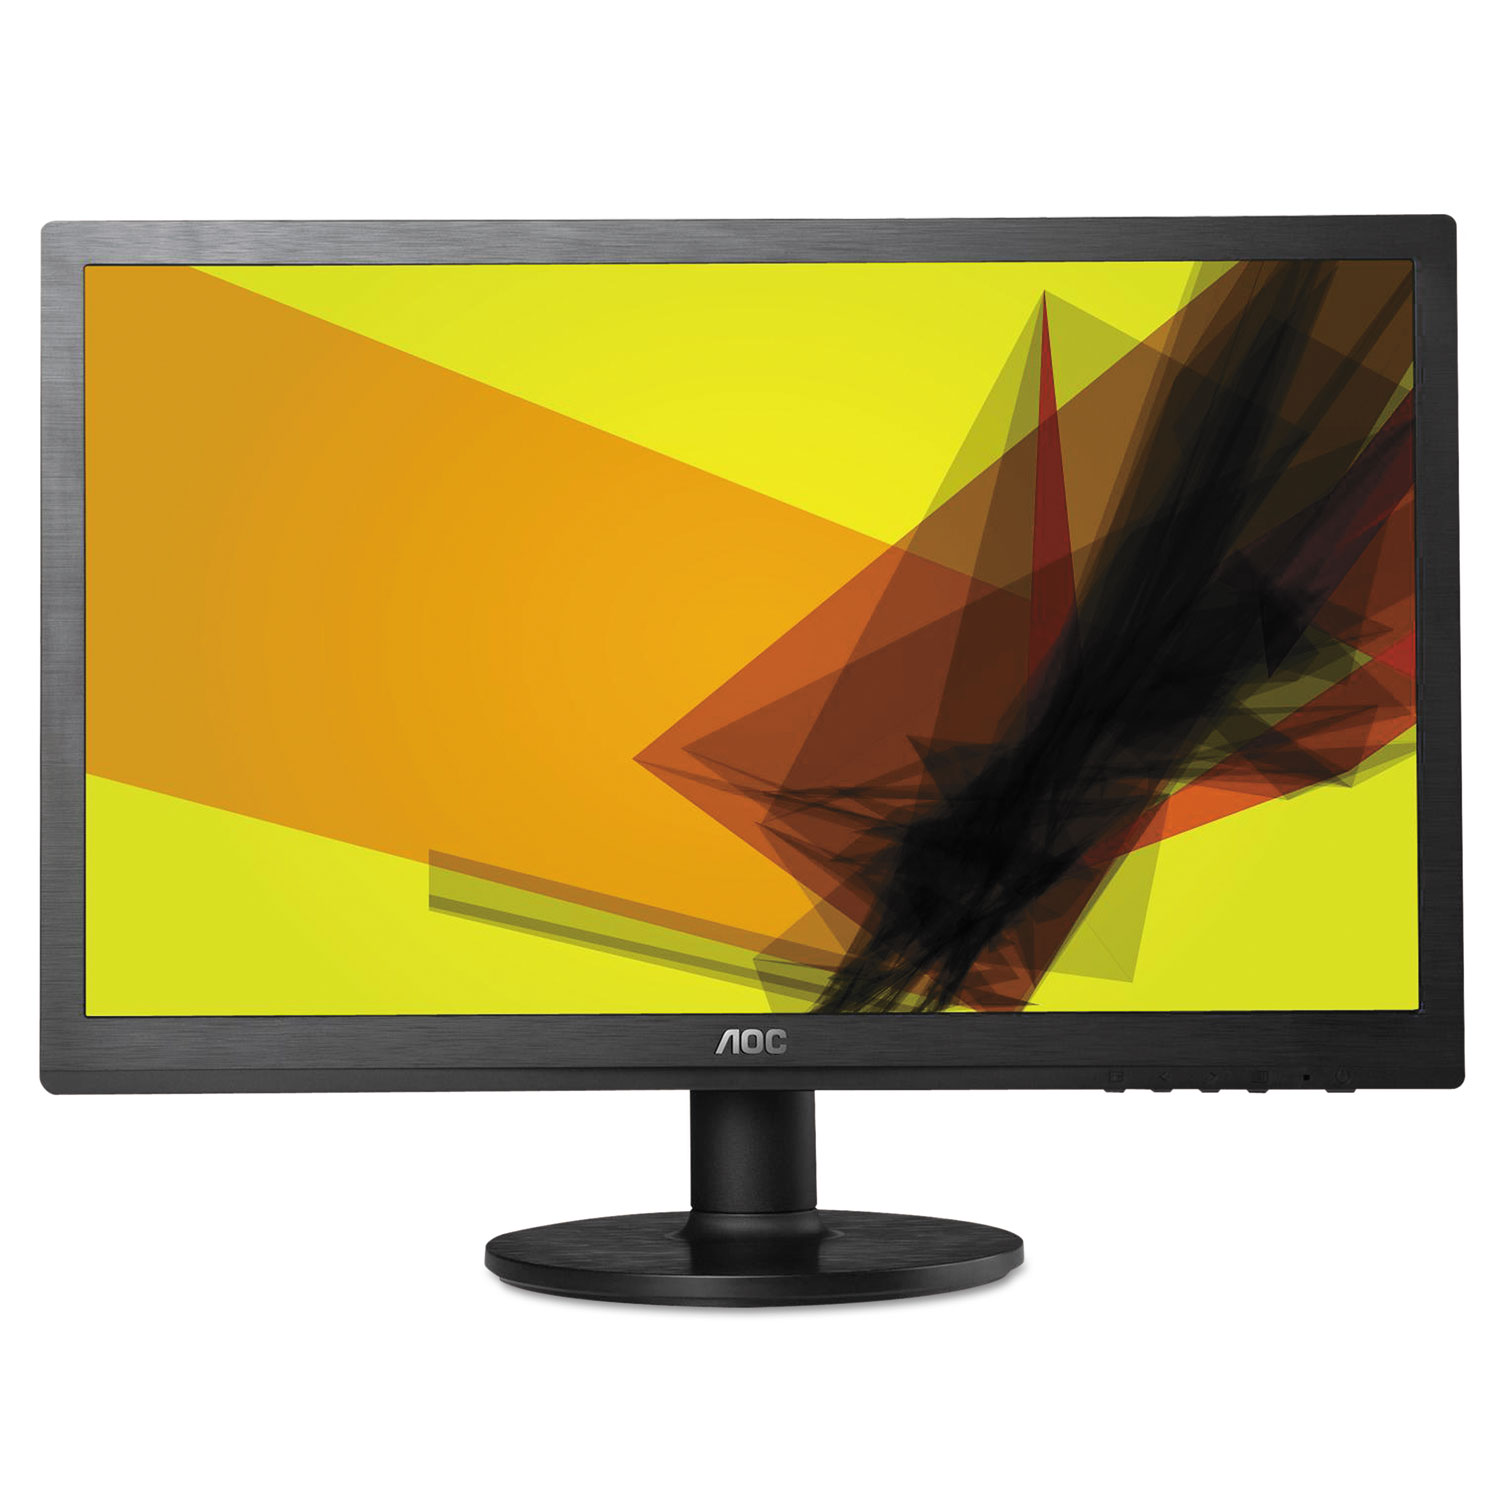 60SWD-Series Widescreen LED Monitor, 21.5